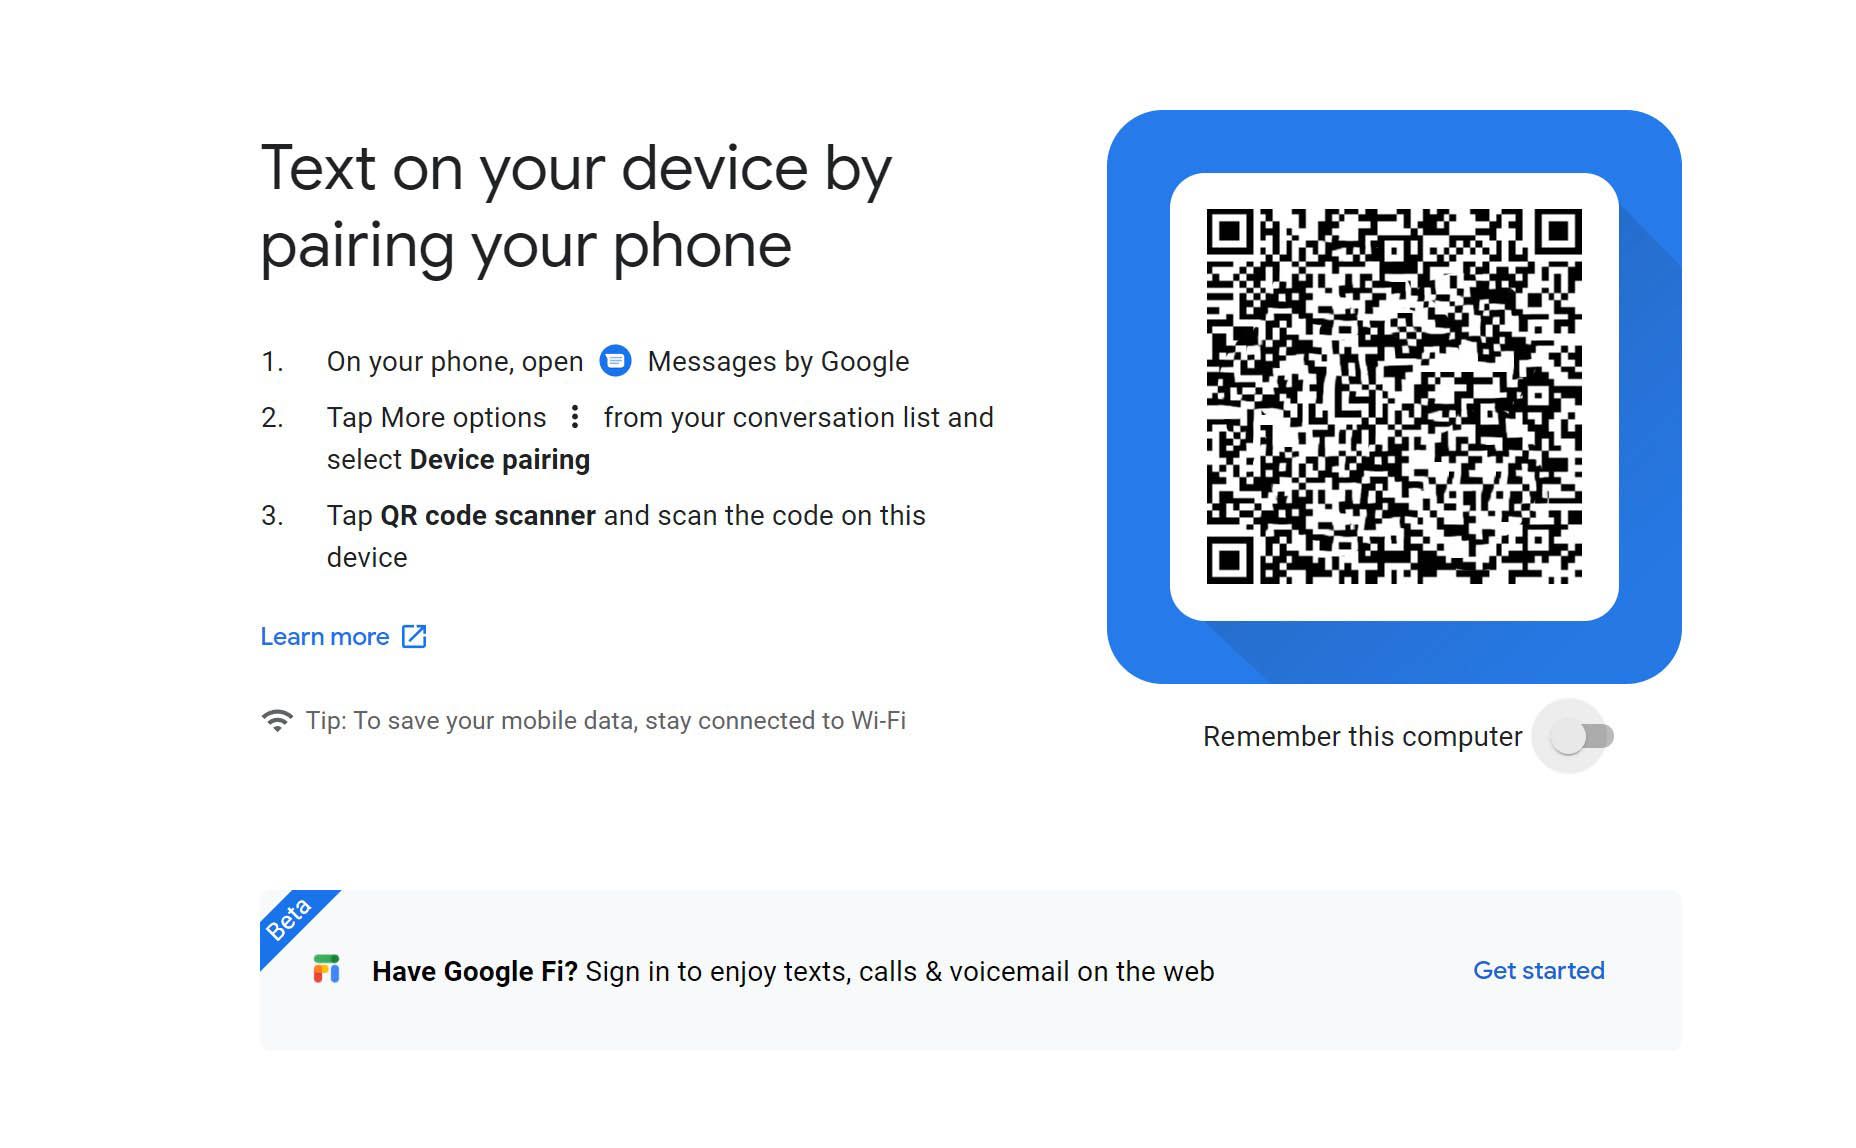 A QR code for pairing Google Messages to the web from your phone